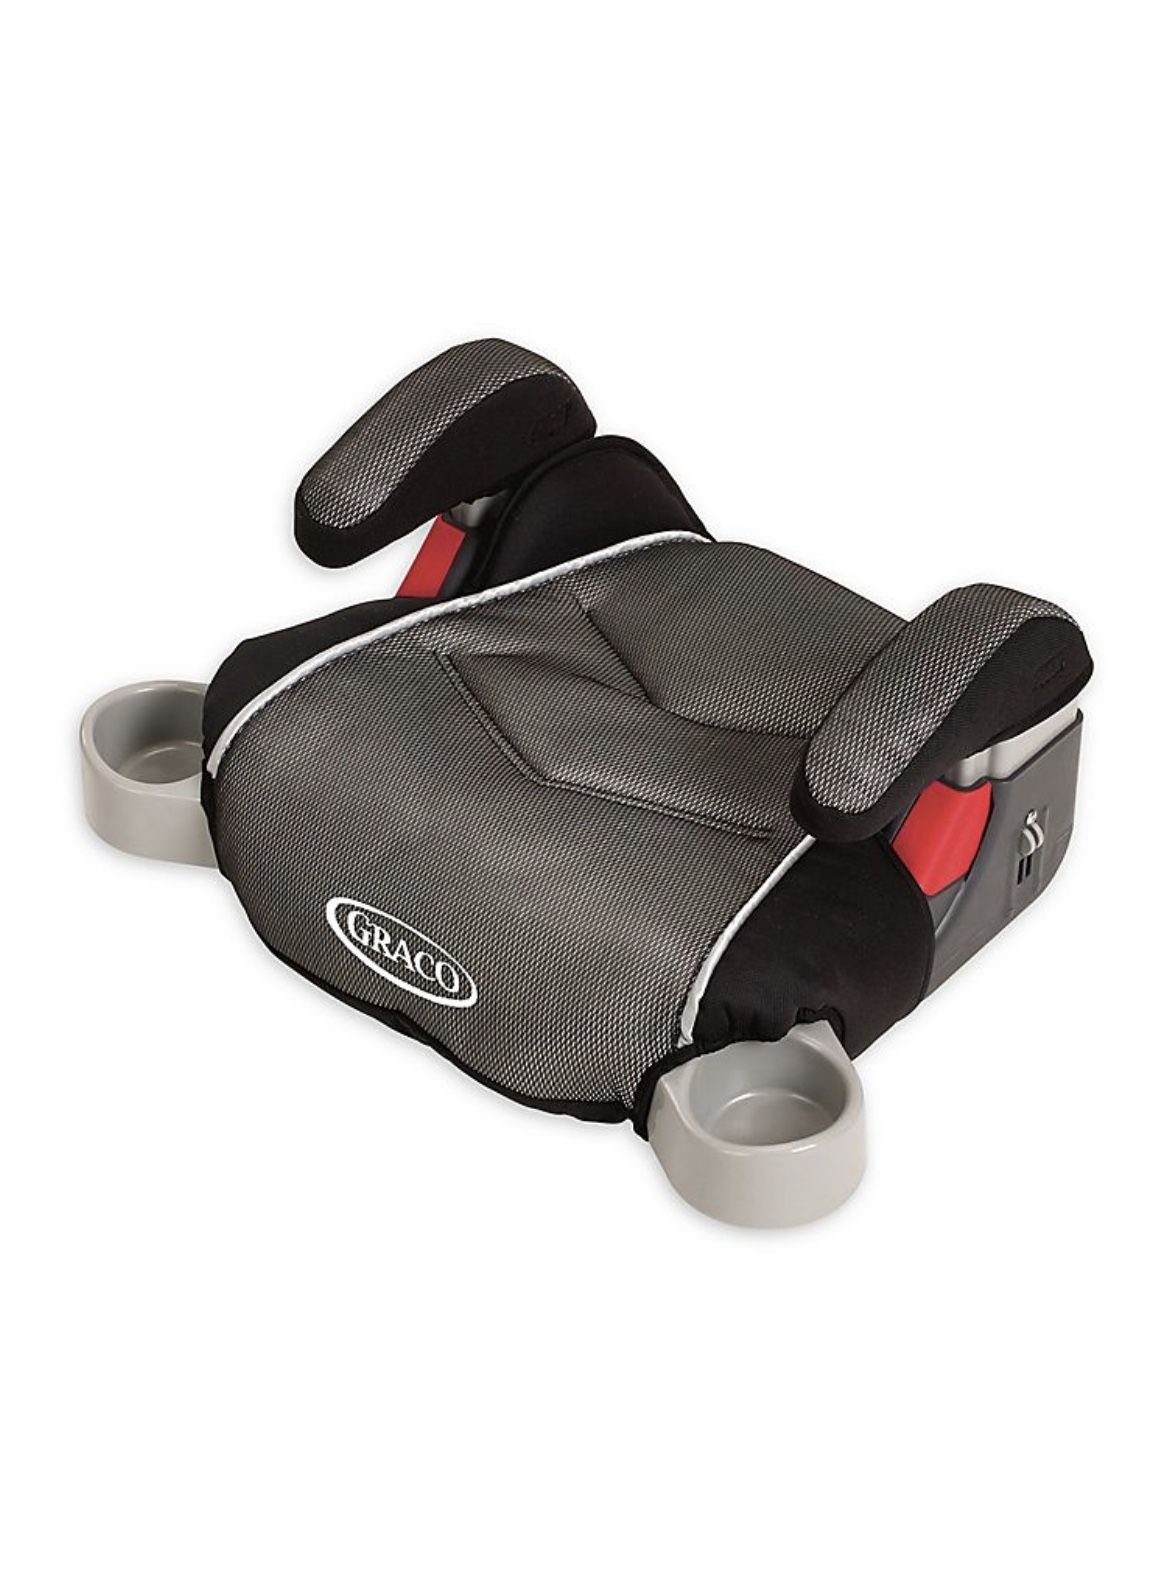 Graco Backless TurboBooster Car Seat in Galaxy